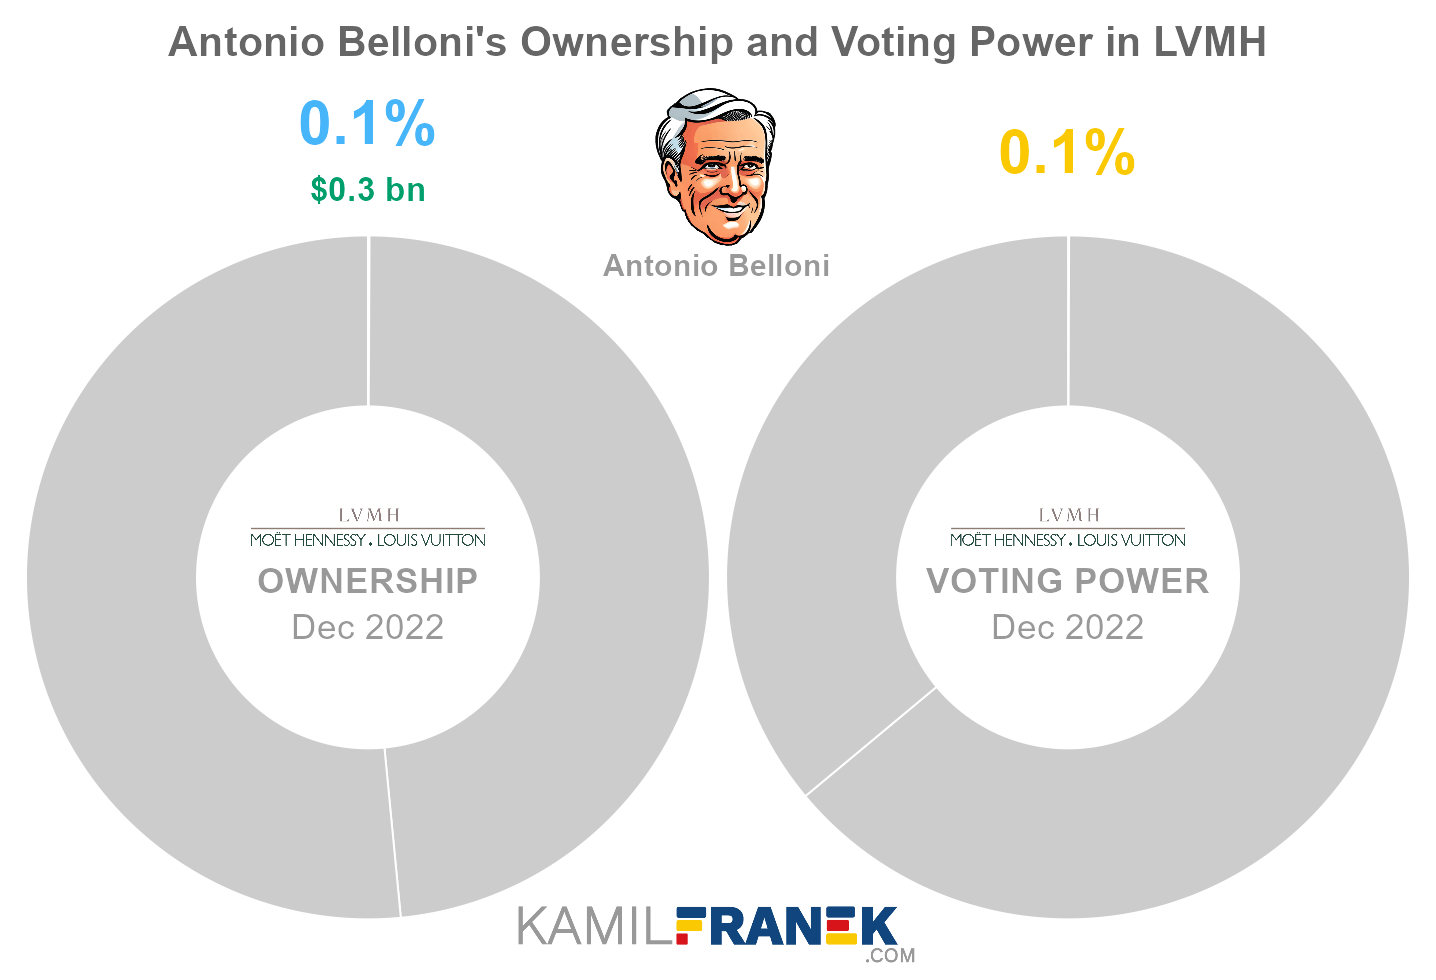 Antonio Belloni's share ownership and voting power in LVMH (chart)